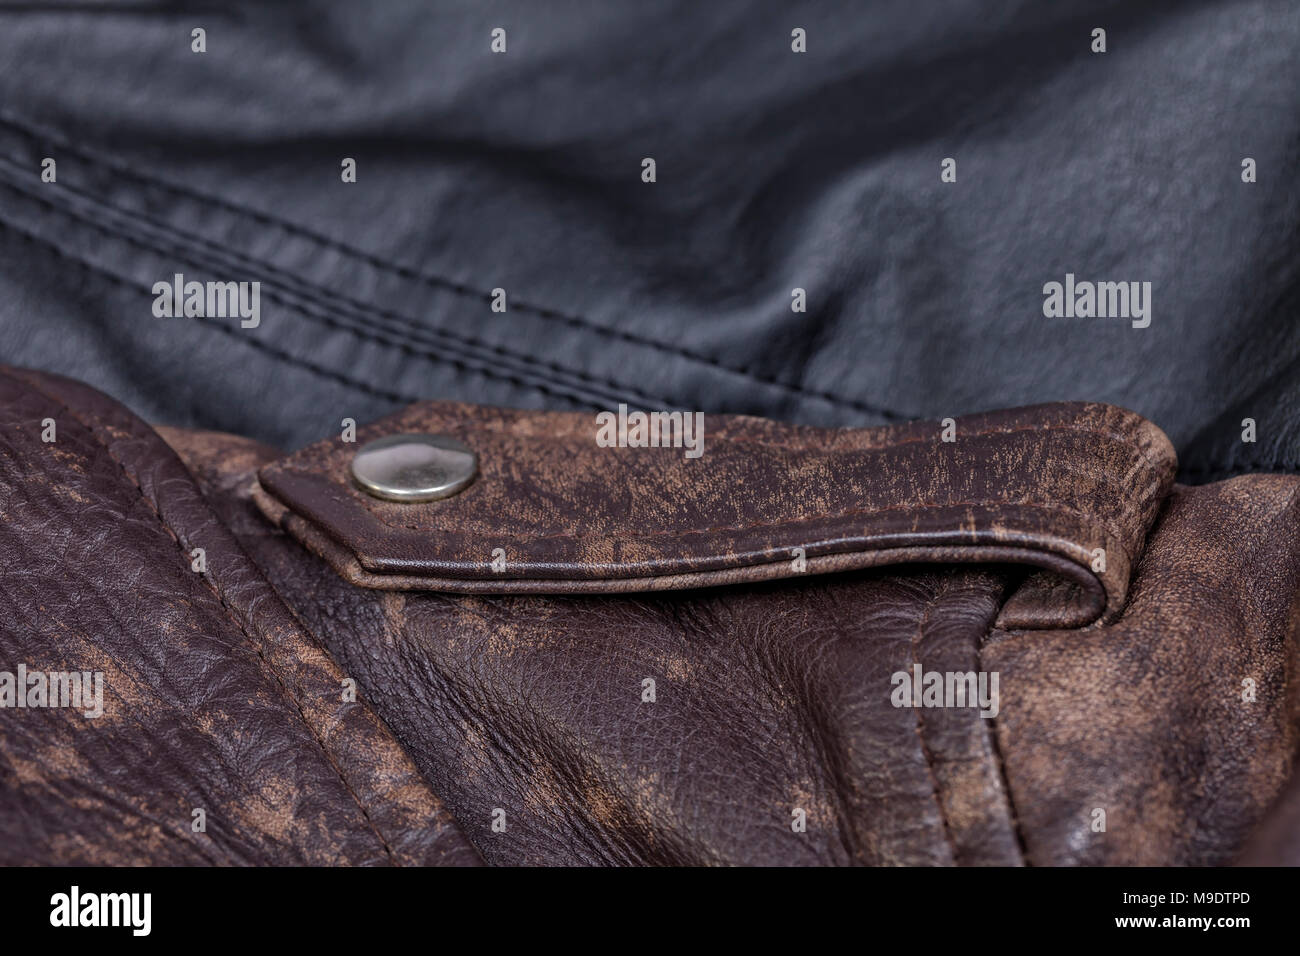 Leather jackets in brown and black colors background. Stock Photo